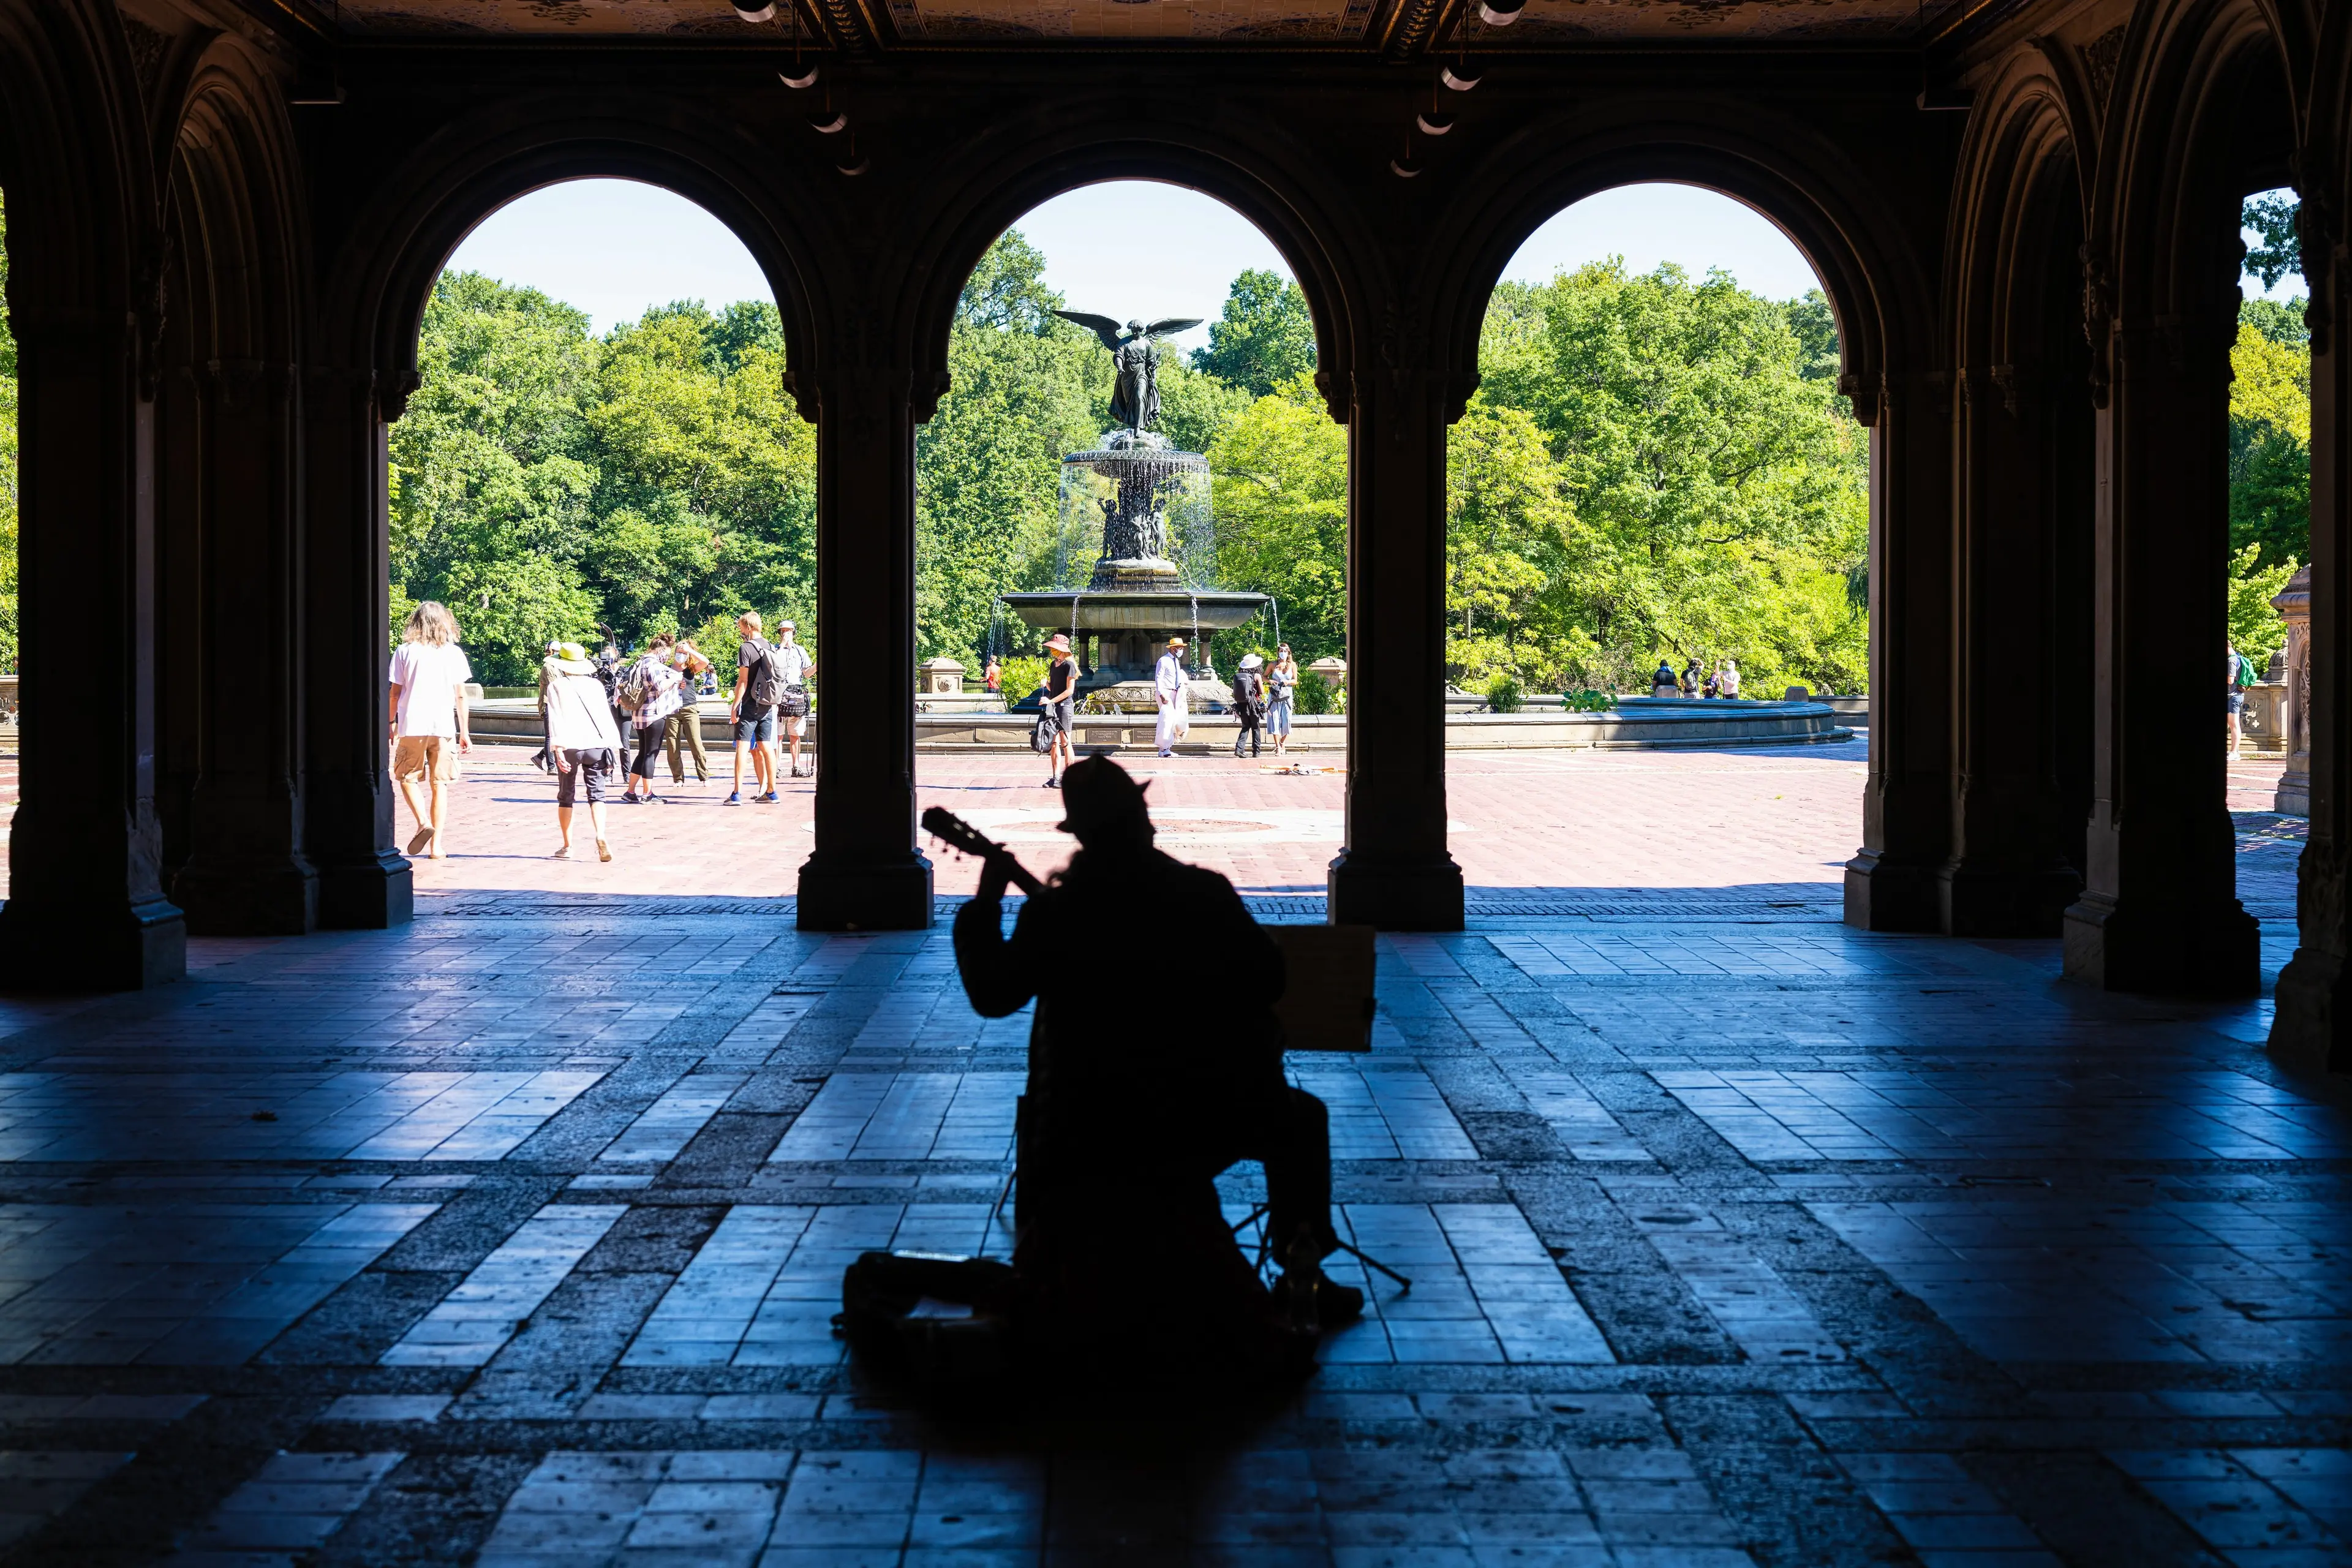 Musician near the Fountain in the Central Park